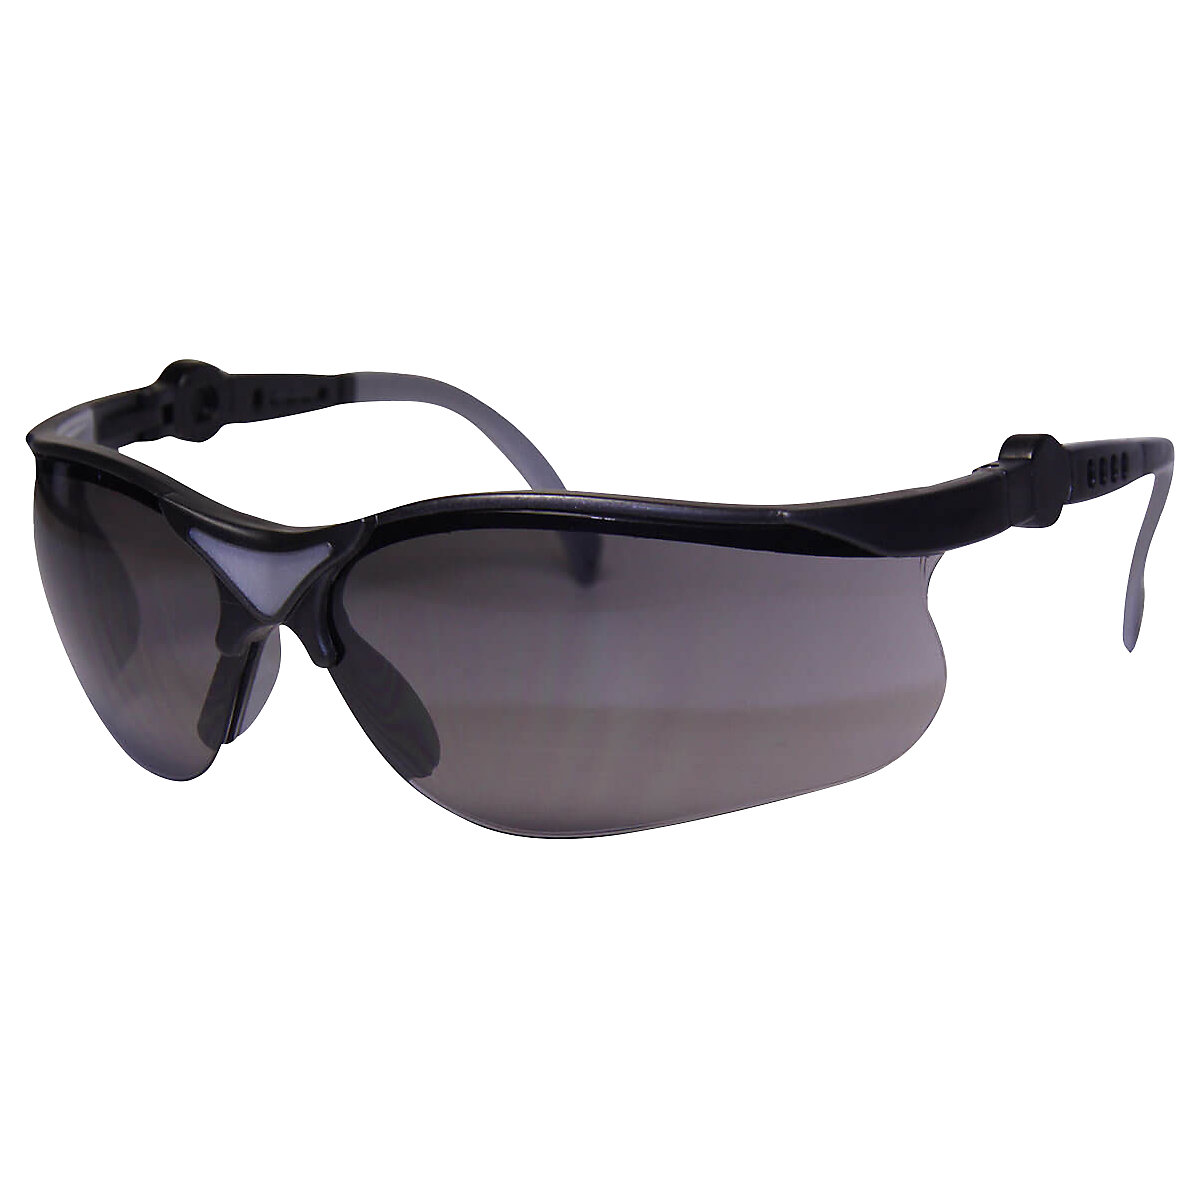 IONIC safety goggles with UV protection